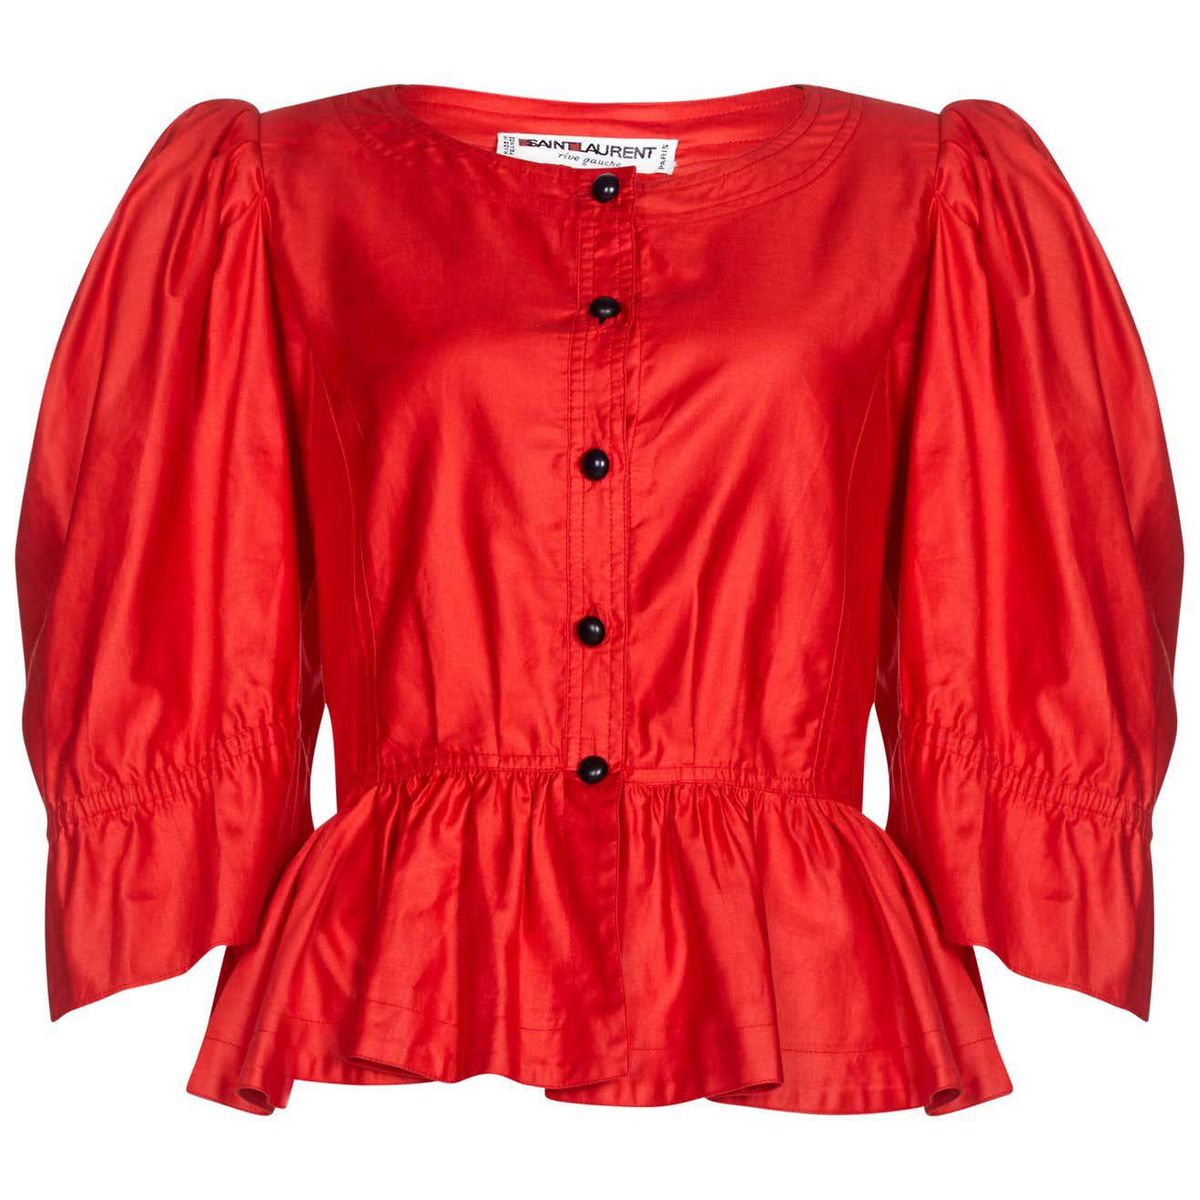 yves saint laurent 1970s red cotton bell sleeve blouse